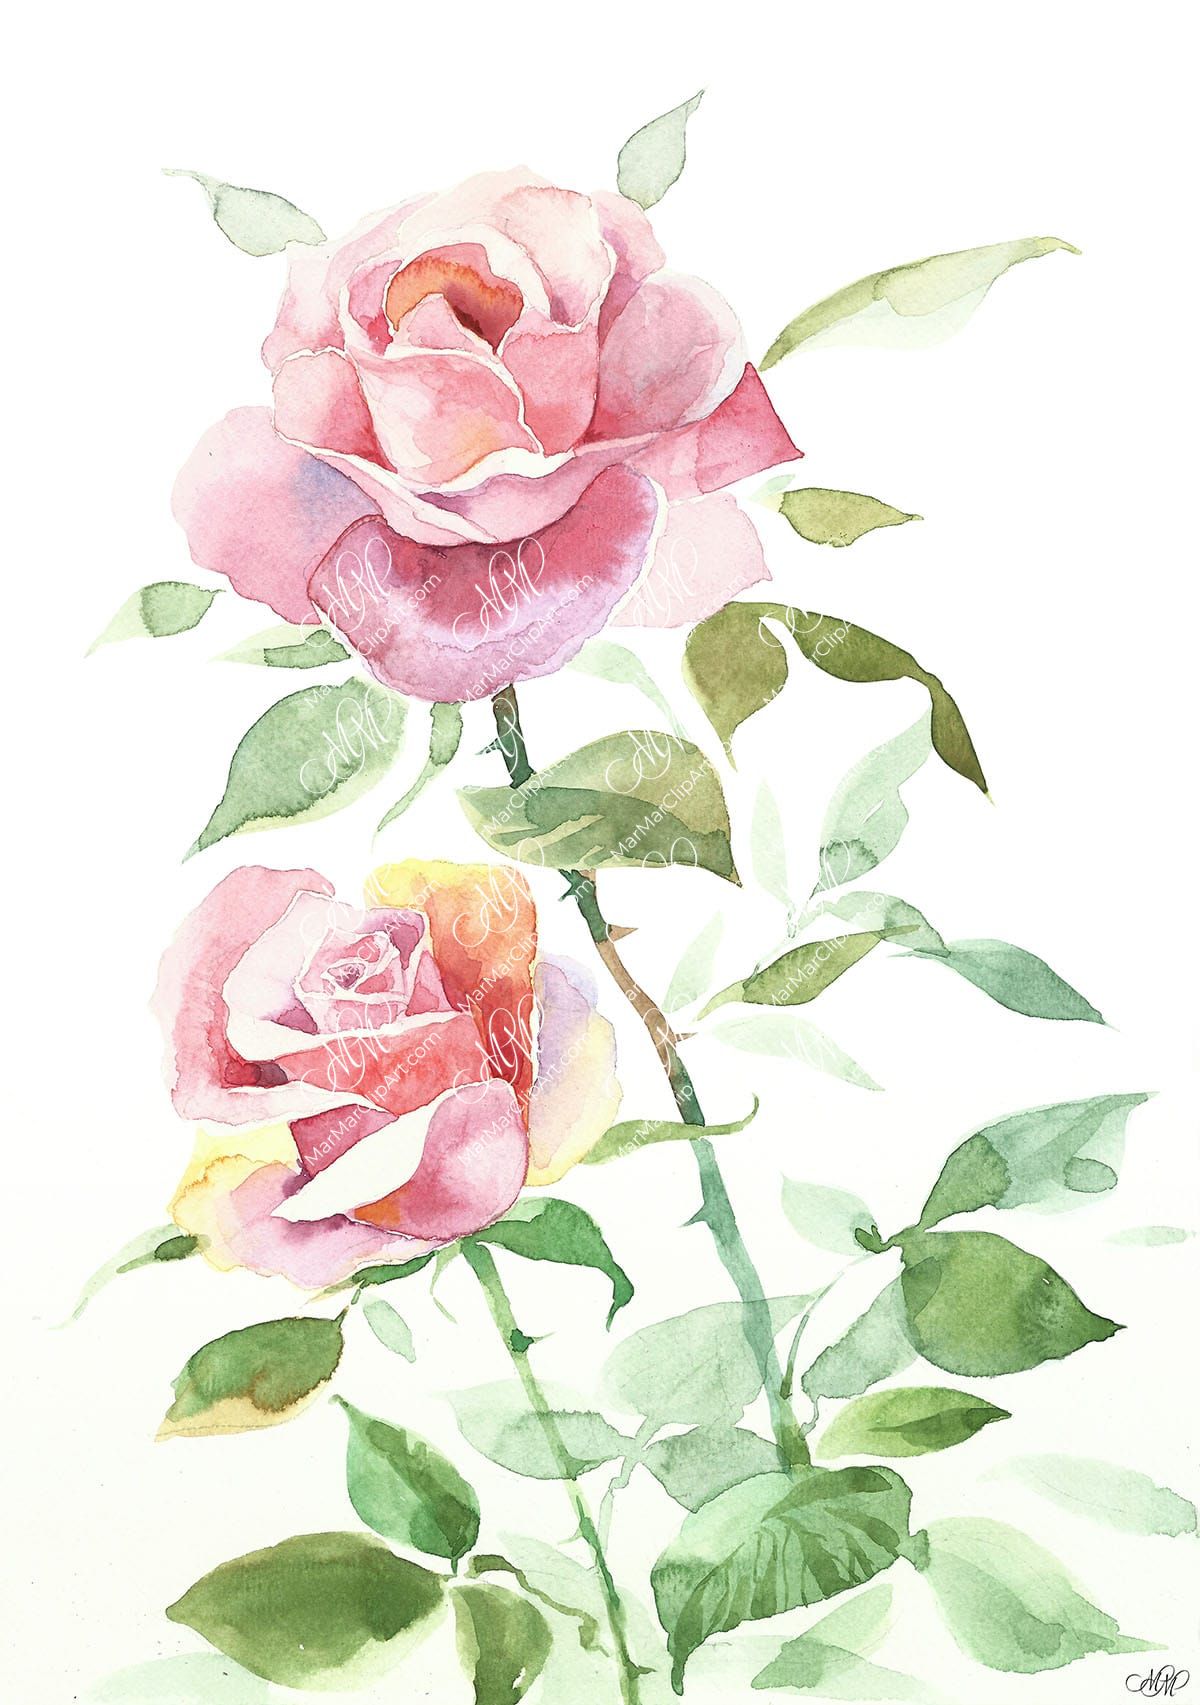 2 pink roses. Isolated on white background with work path. Watercolor. 41x59cm. Roses.jpg 10Mb. RGB. 300 px. Instant download.